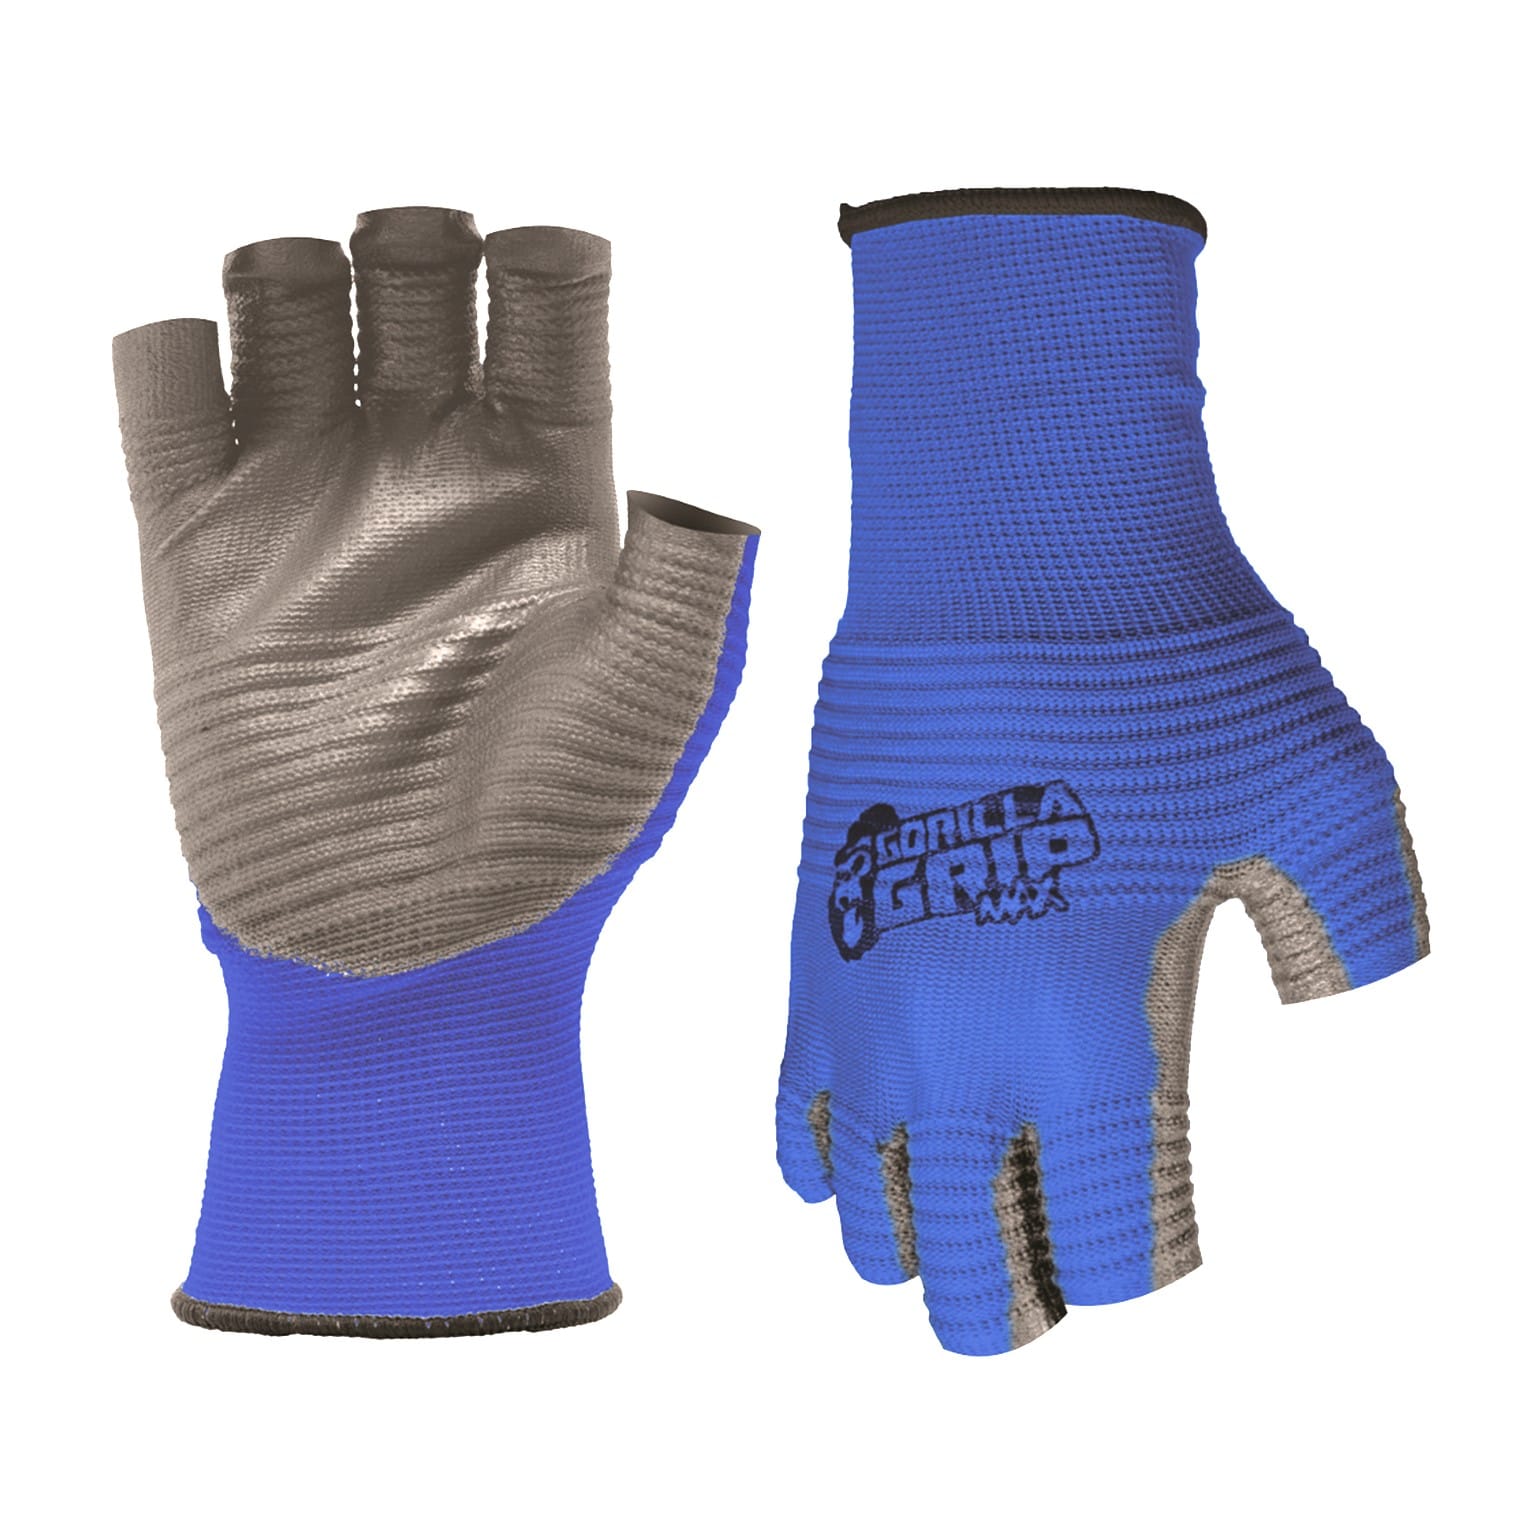 Gorilla Grip MAX Fingerless Gloves 1-Pair Color: Blue and Black Breathable Fingerless Work and Fishing Gloves with Ribbed Gripping Surface 